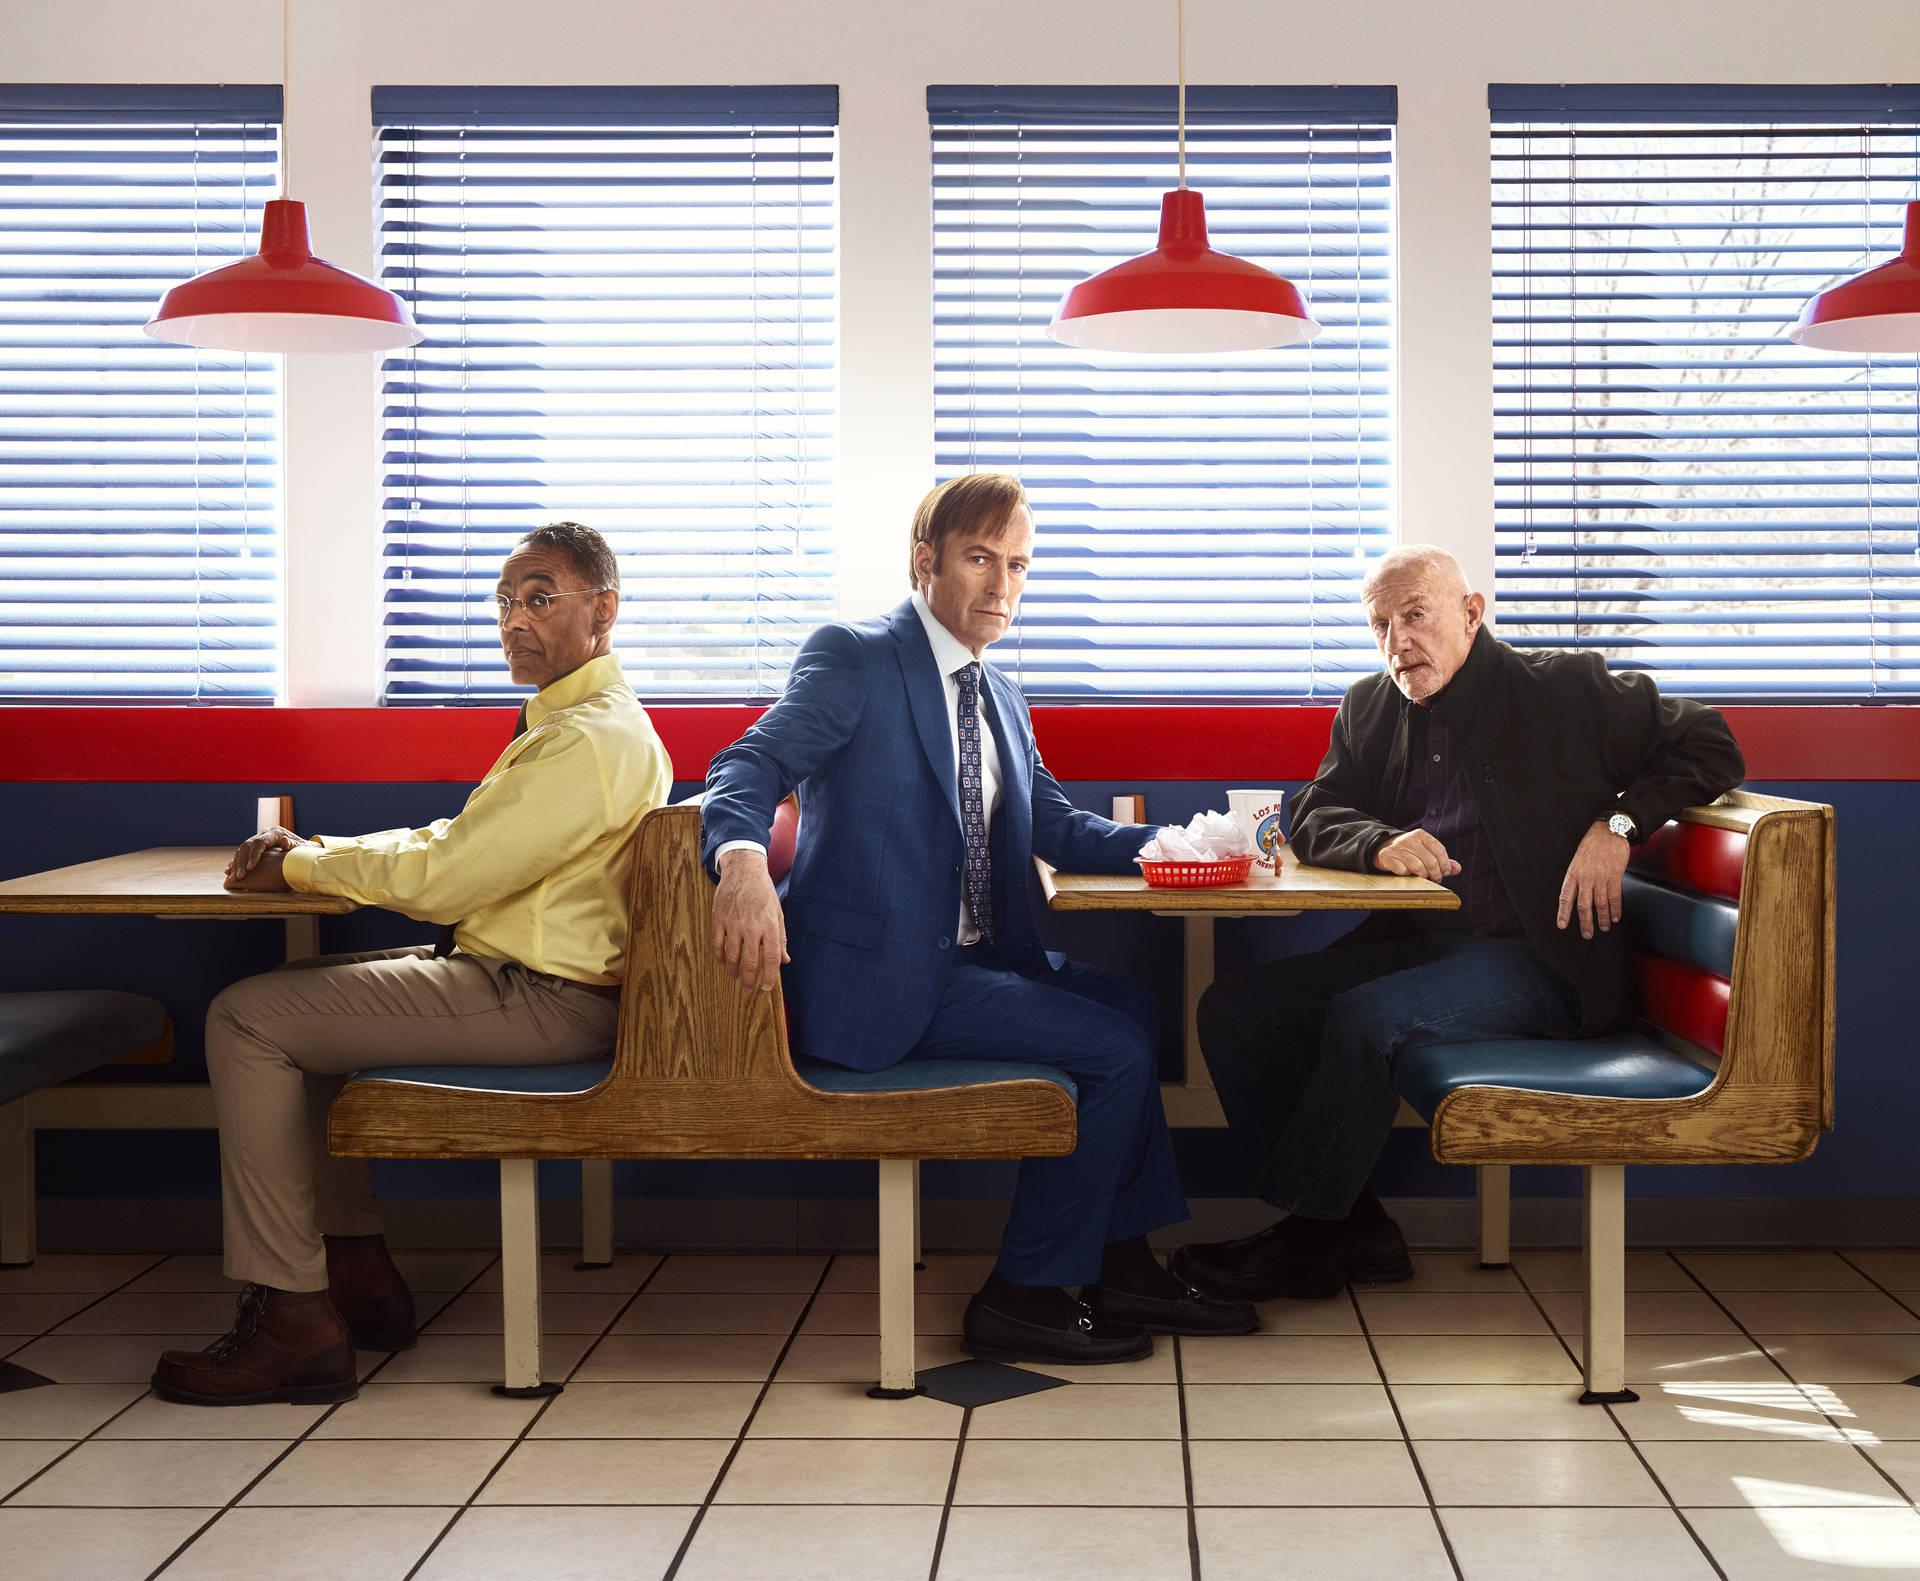 Better Call Saul Diner Background